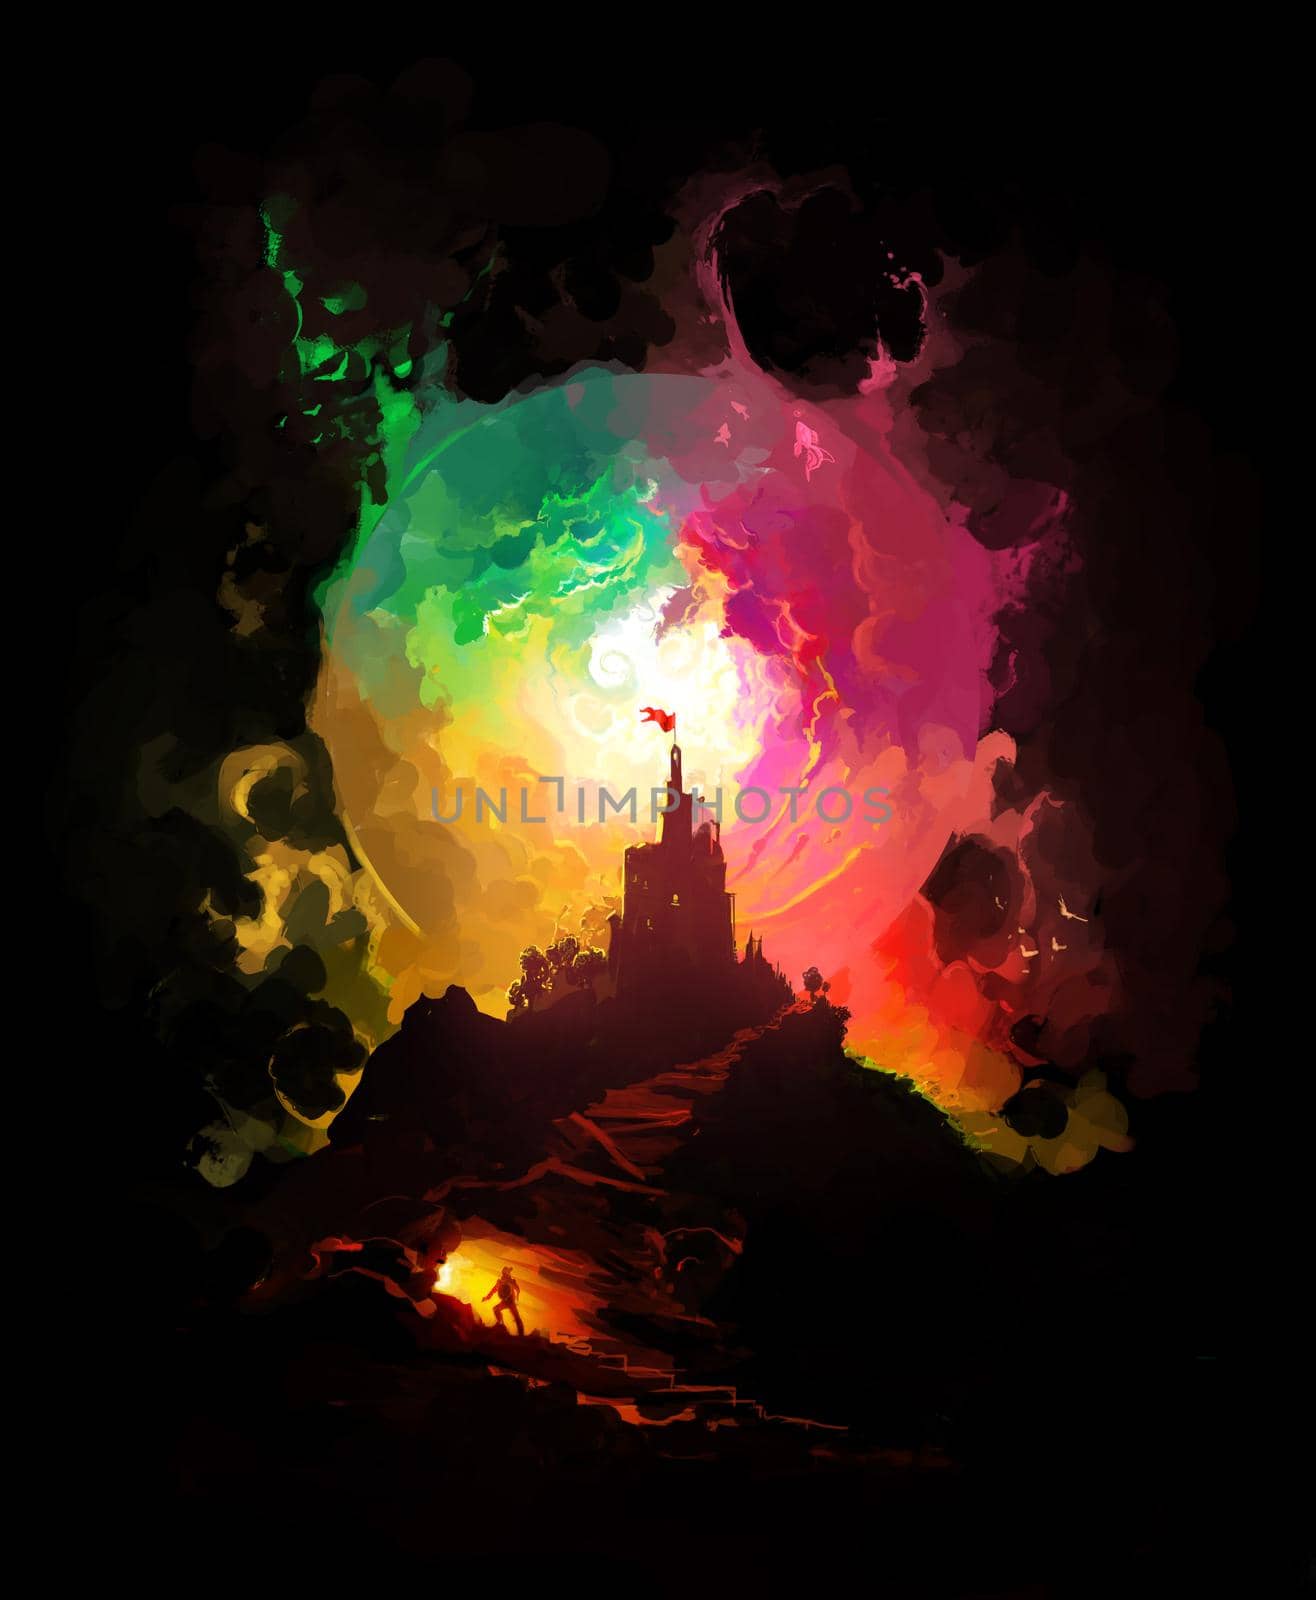 Fantasy Scenic Landscape Illustration with colorful Sky and Castle Tower of Fairytale Kingdom on the Mountain. 